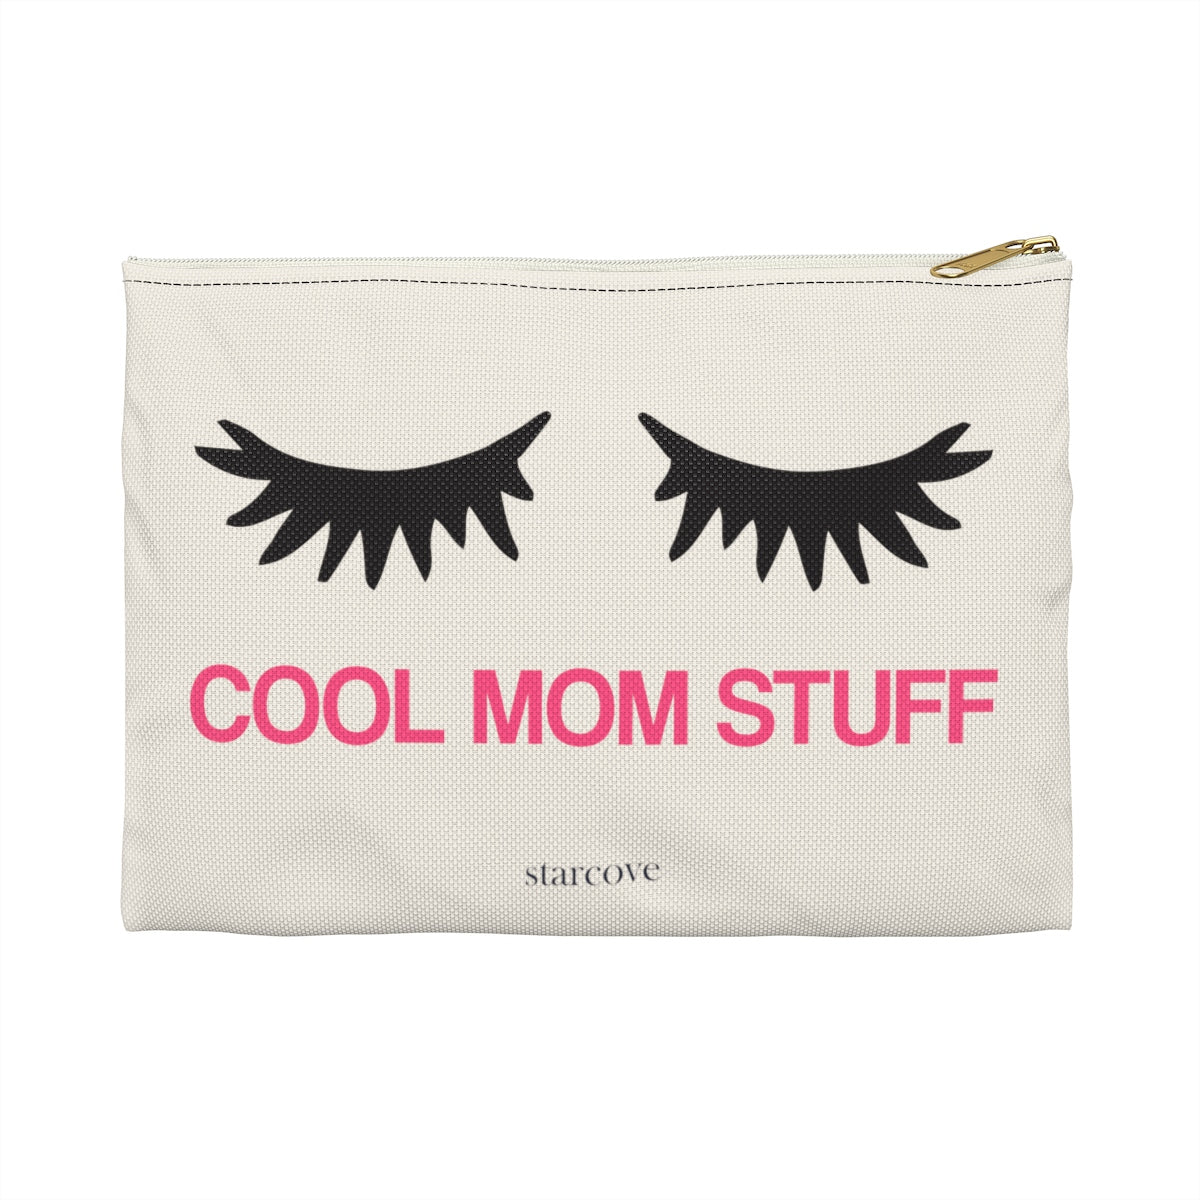 Cool Mom Stuff Makeup bag, Canvas Zipper Pouch Purse, Cosmetic Travel Case Bag, Mother Toiletry Accessory Pouch, Cute Eyelashes Gift Starcove Fashion